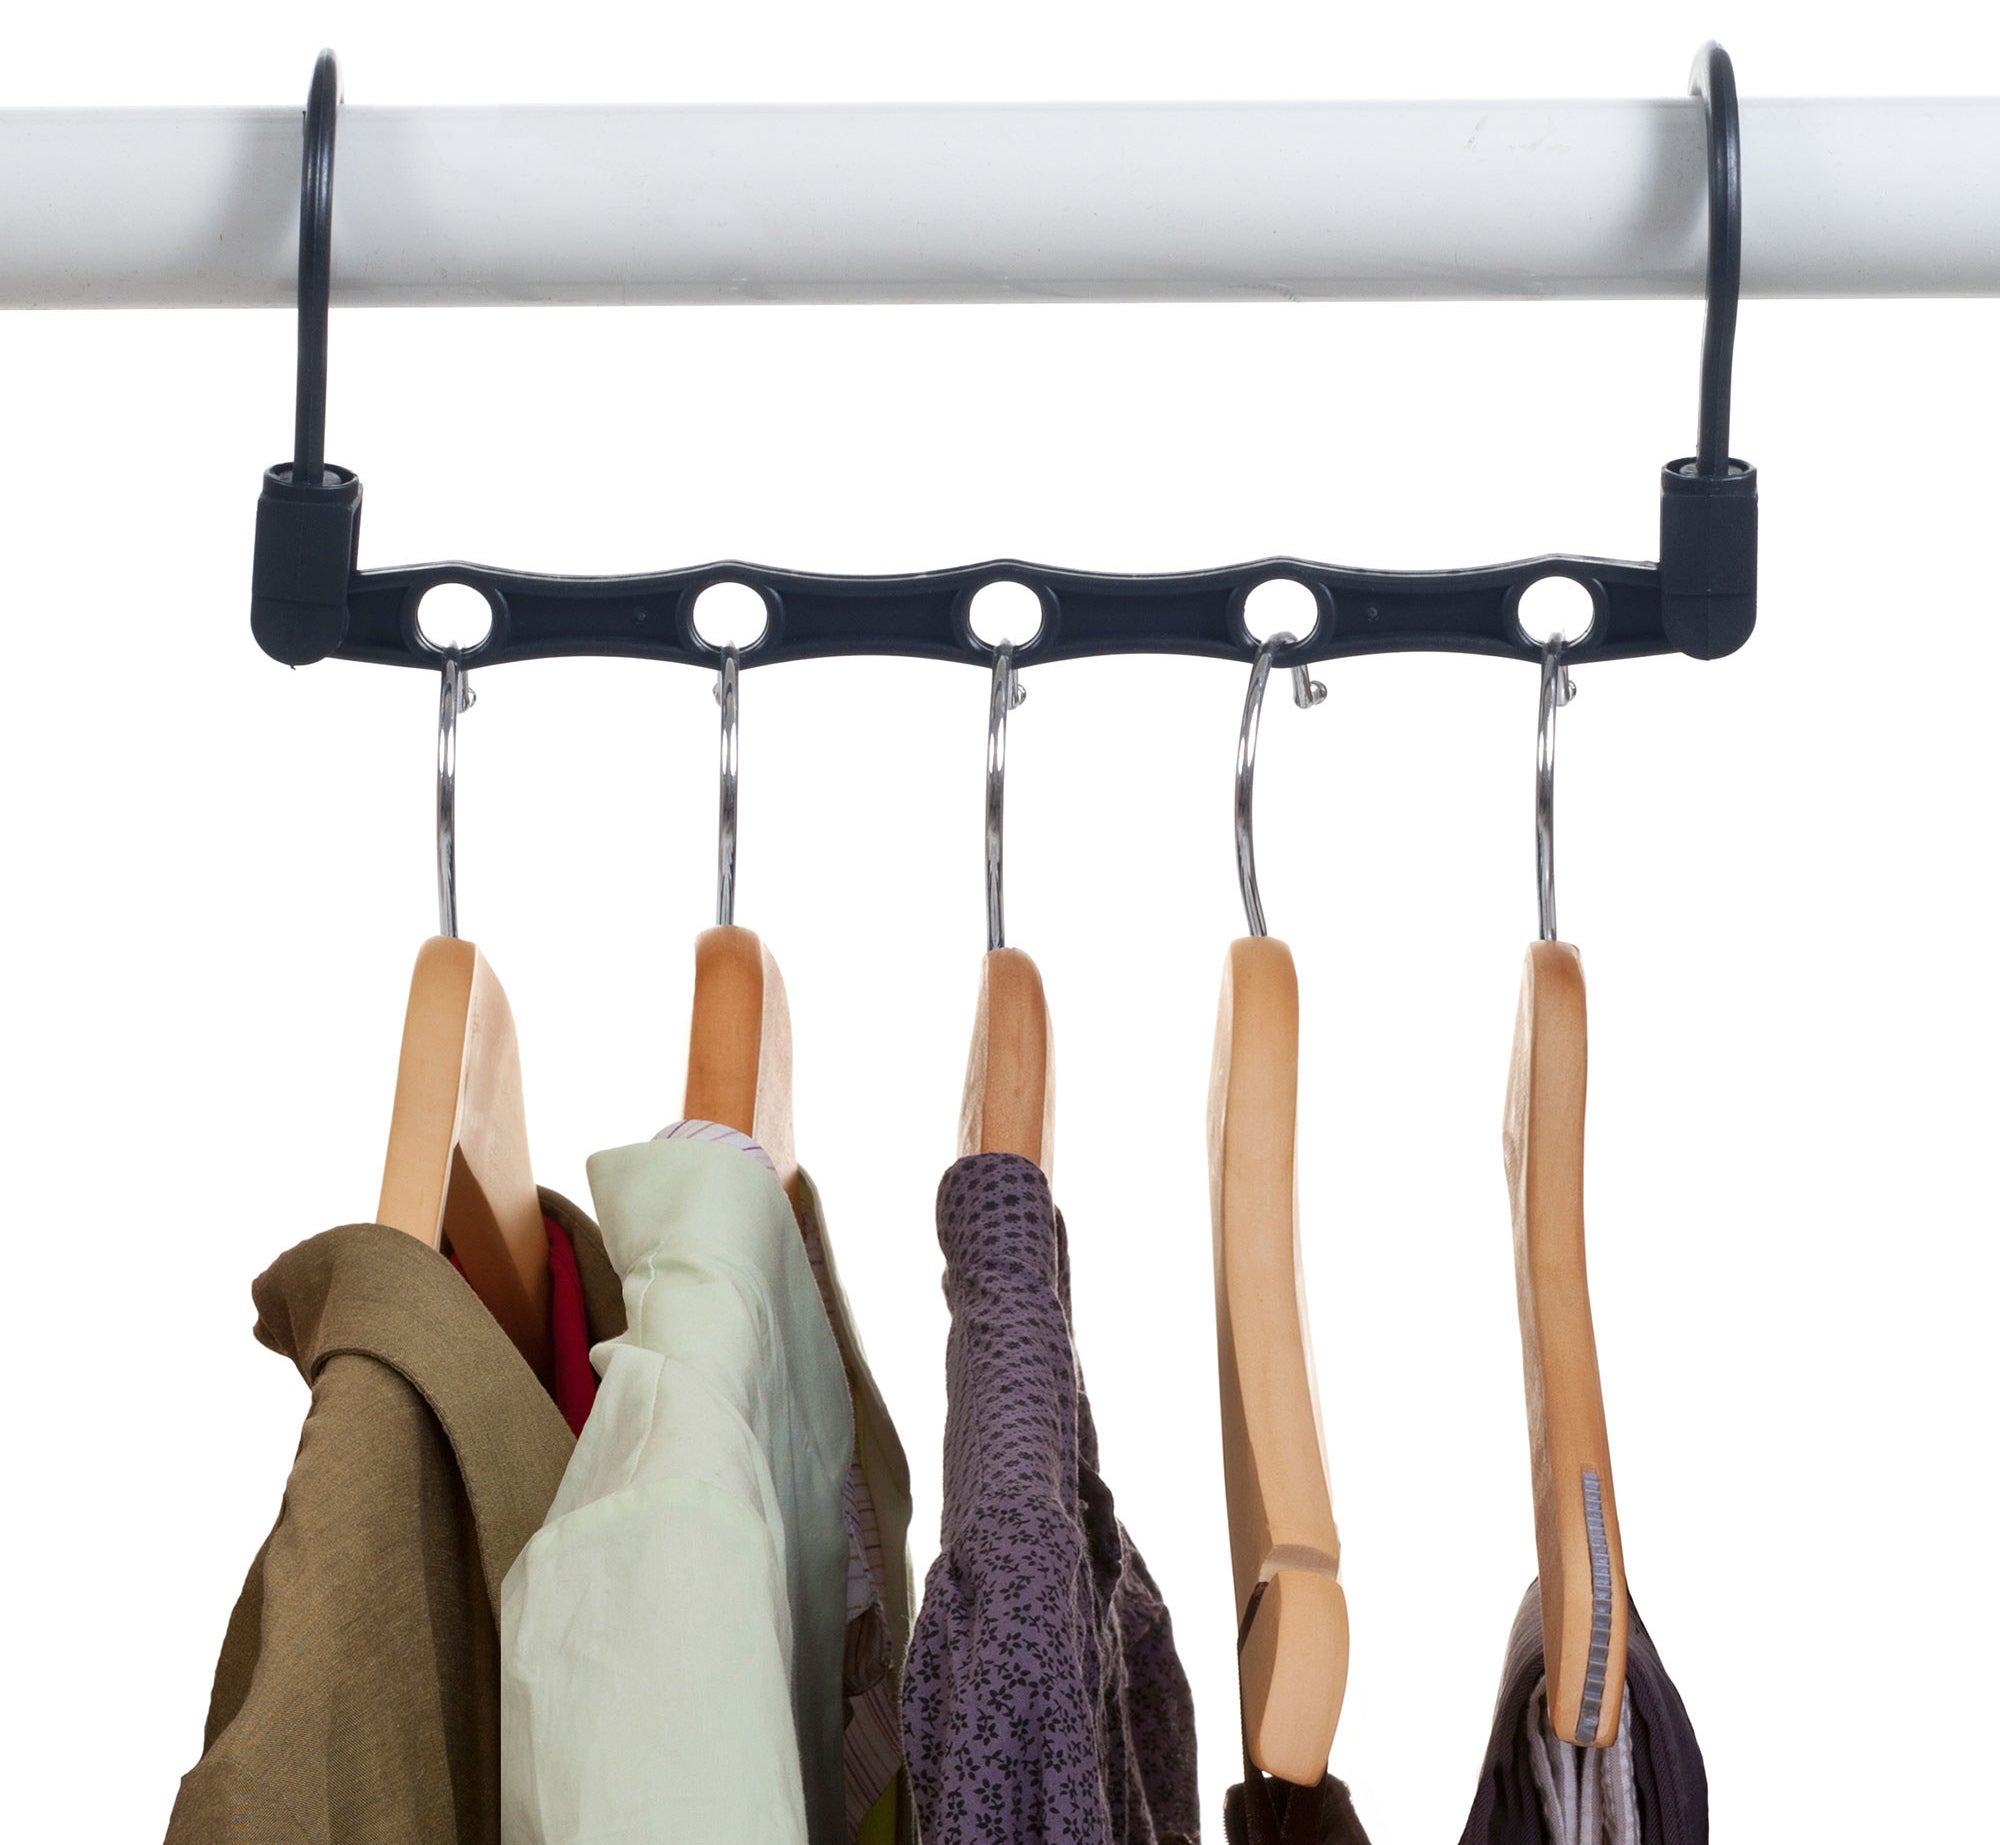 The closet hook with five hanger slots